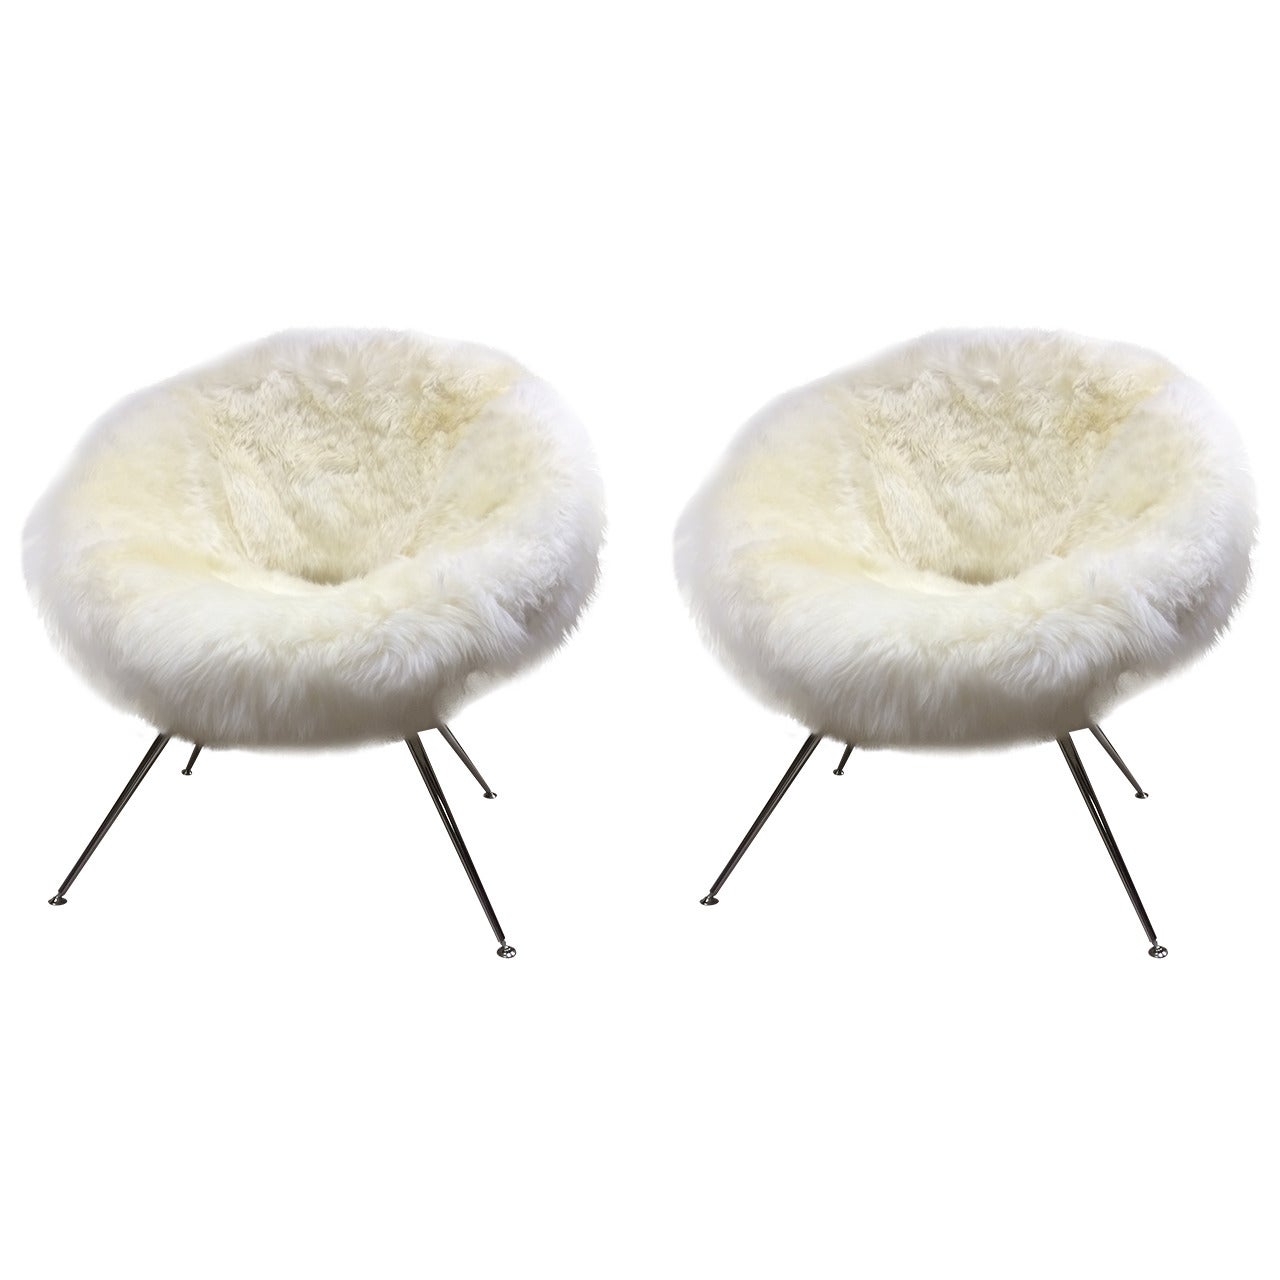 Flying Saucer Style Pair of Chairs Covered in Genuine Long Haired Sheep Skin Fur For Sale